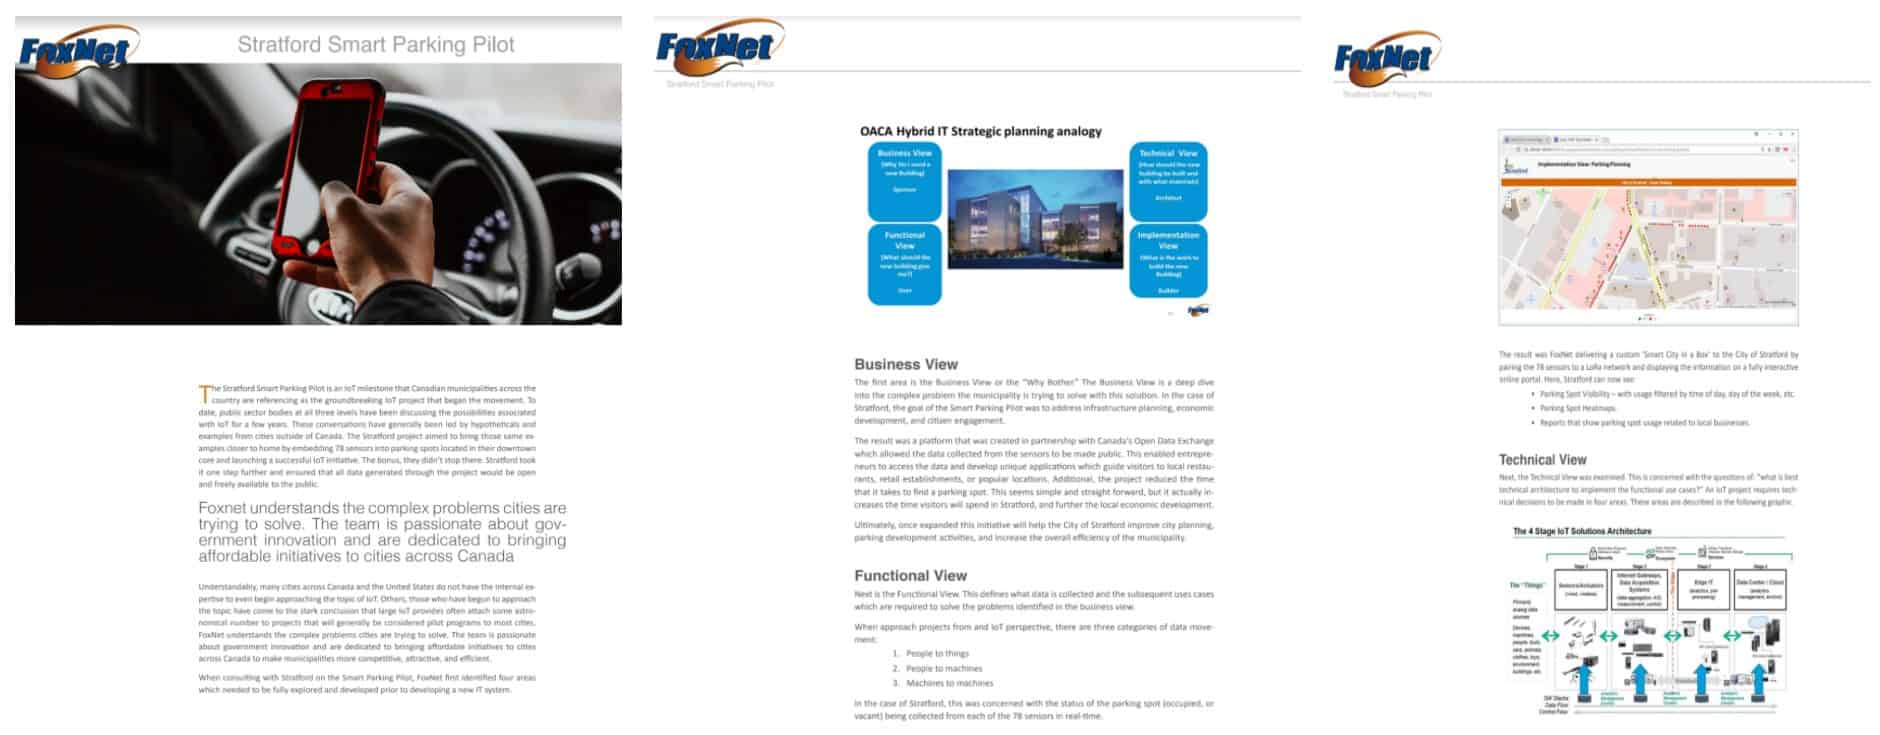 lead magnet case study example